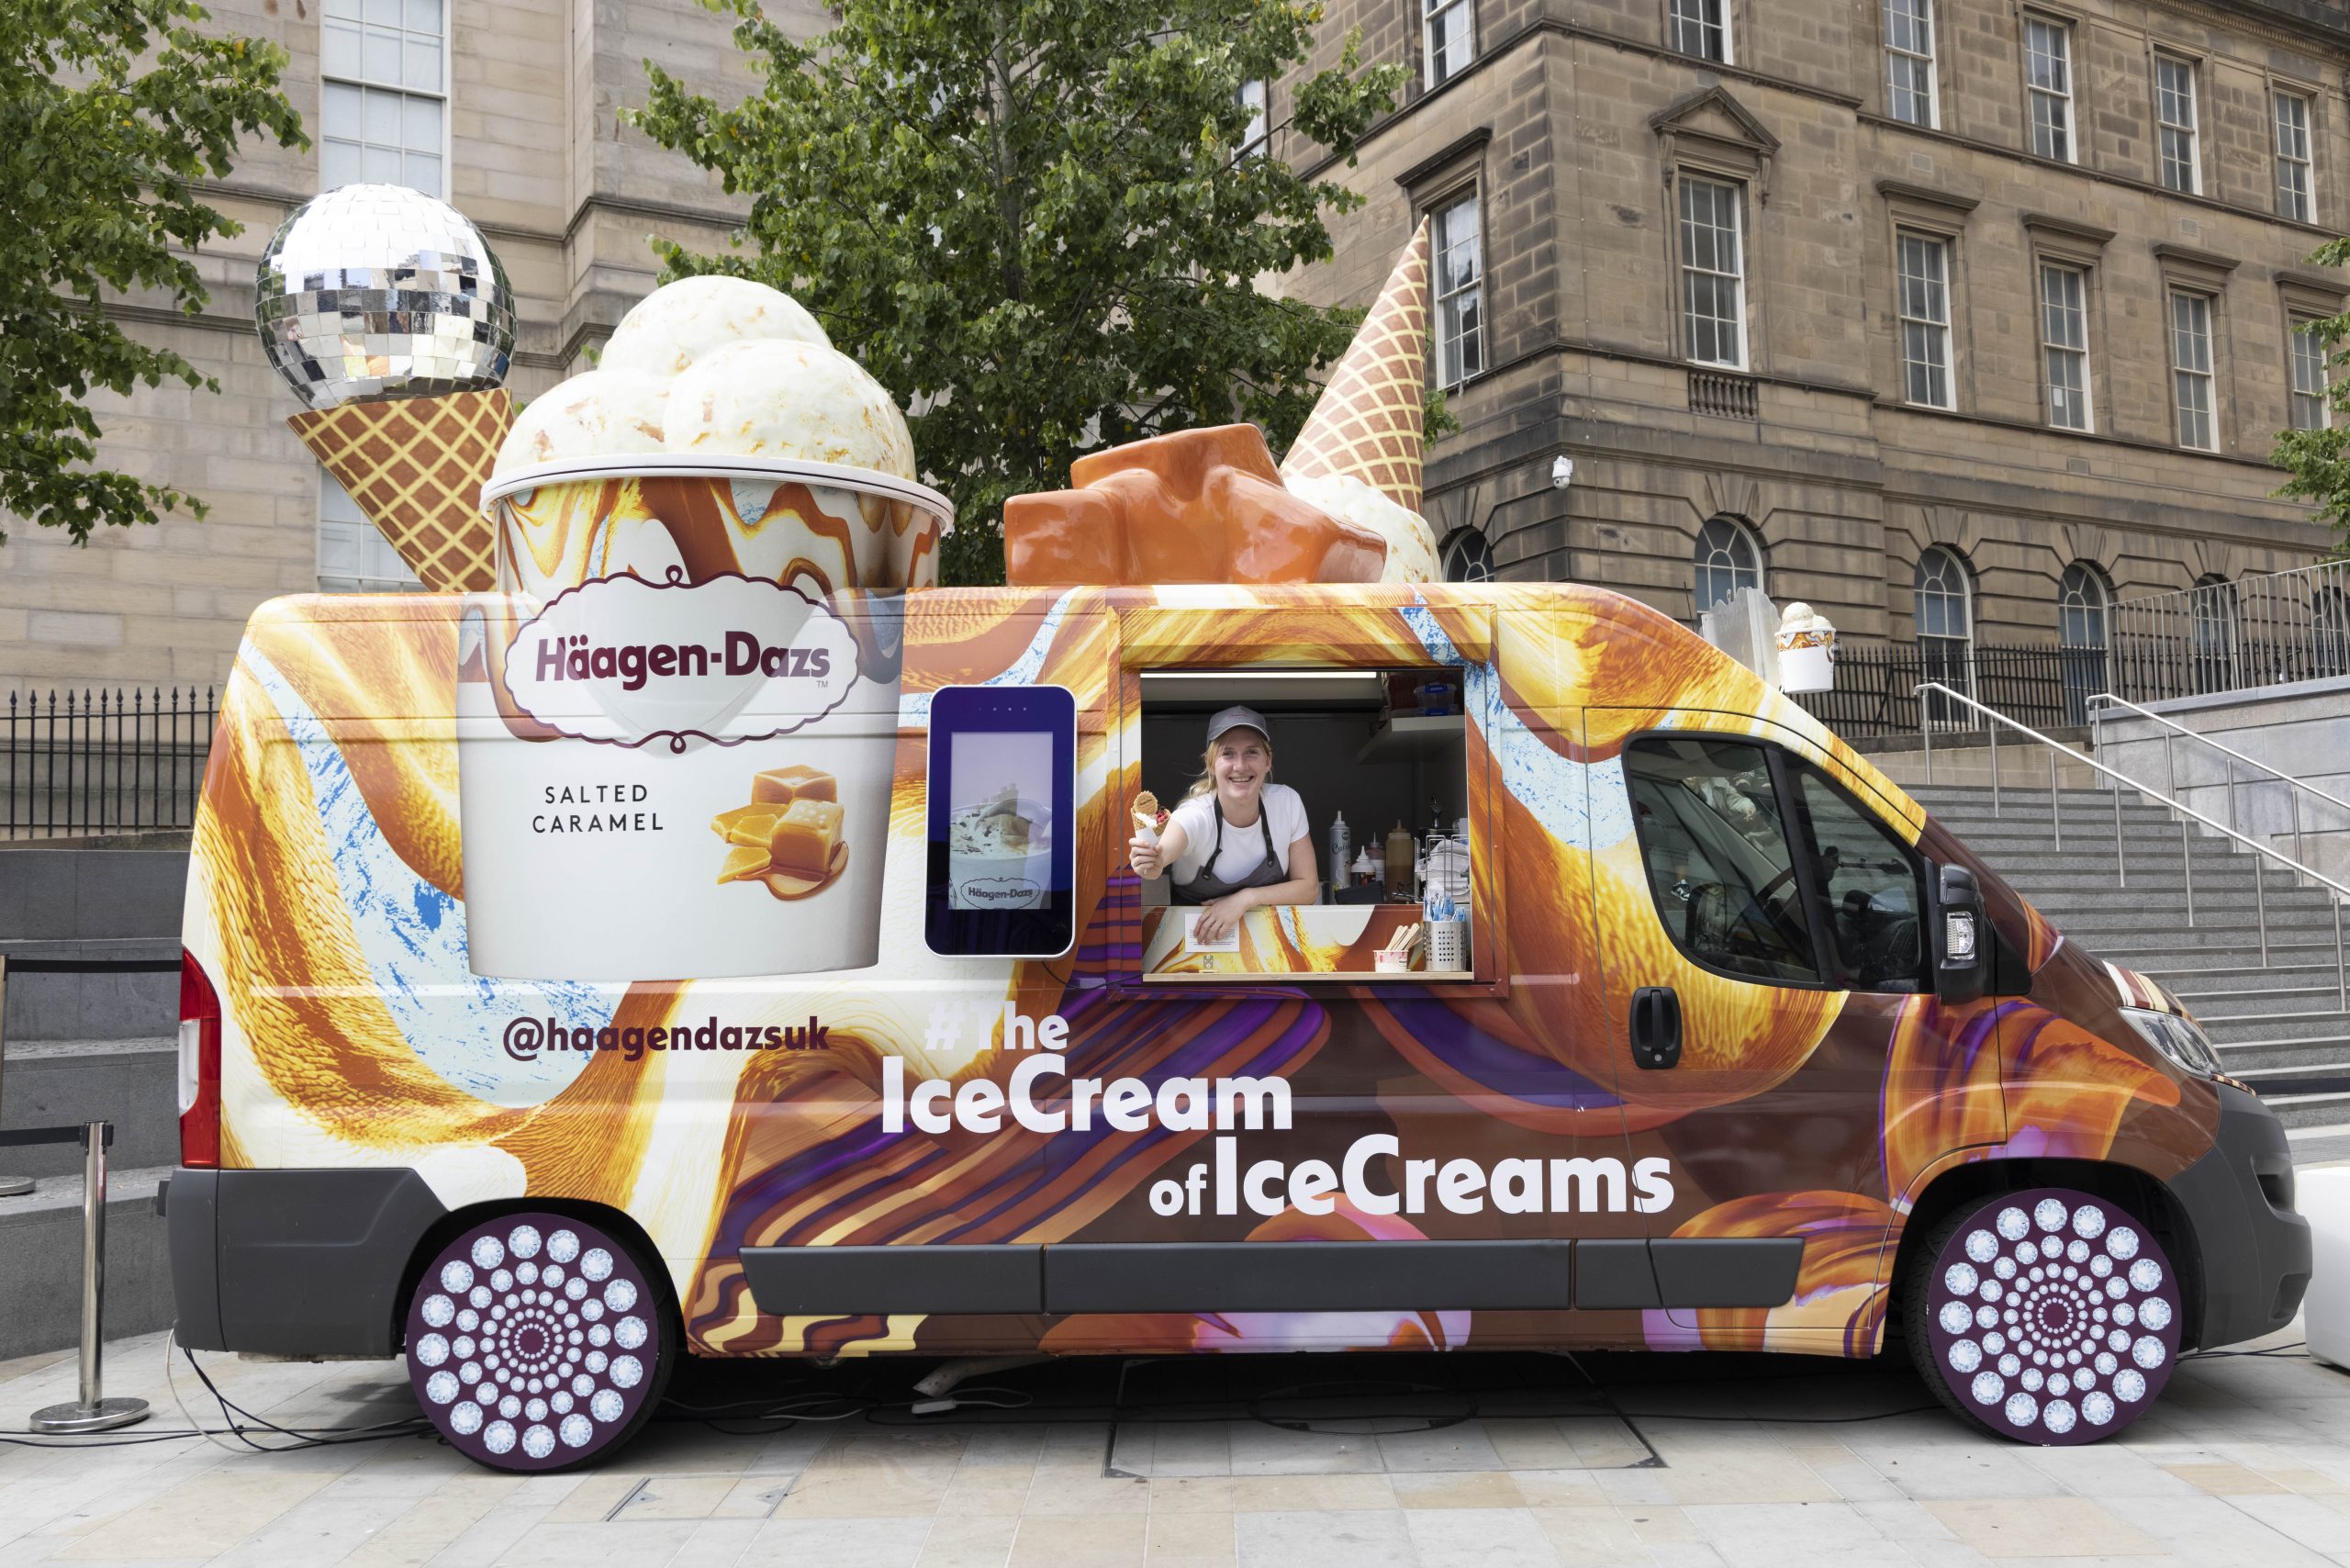 Wandsworth gets the inside scoop with Häagen-Dazs takeover